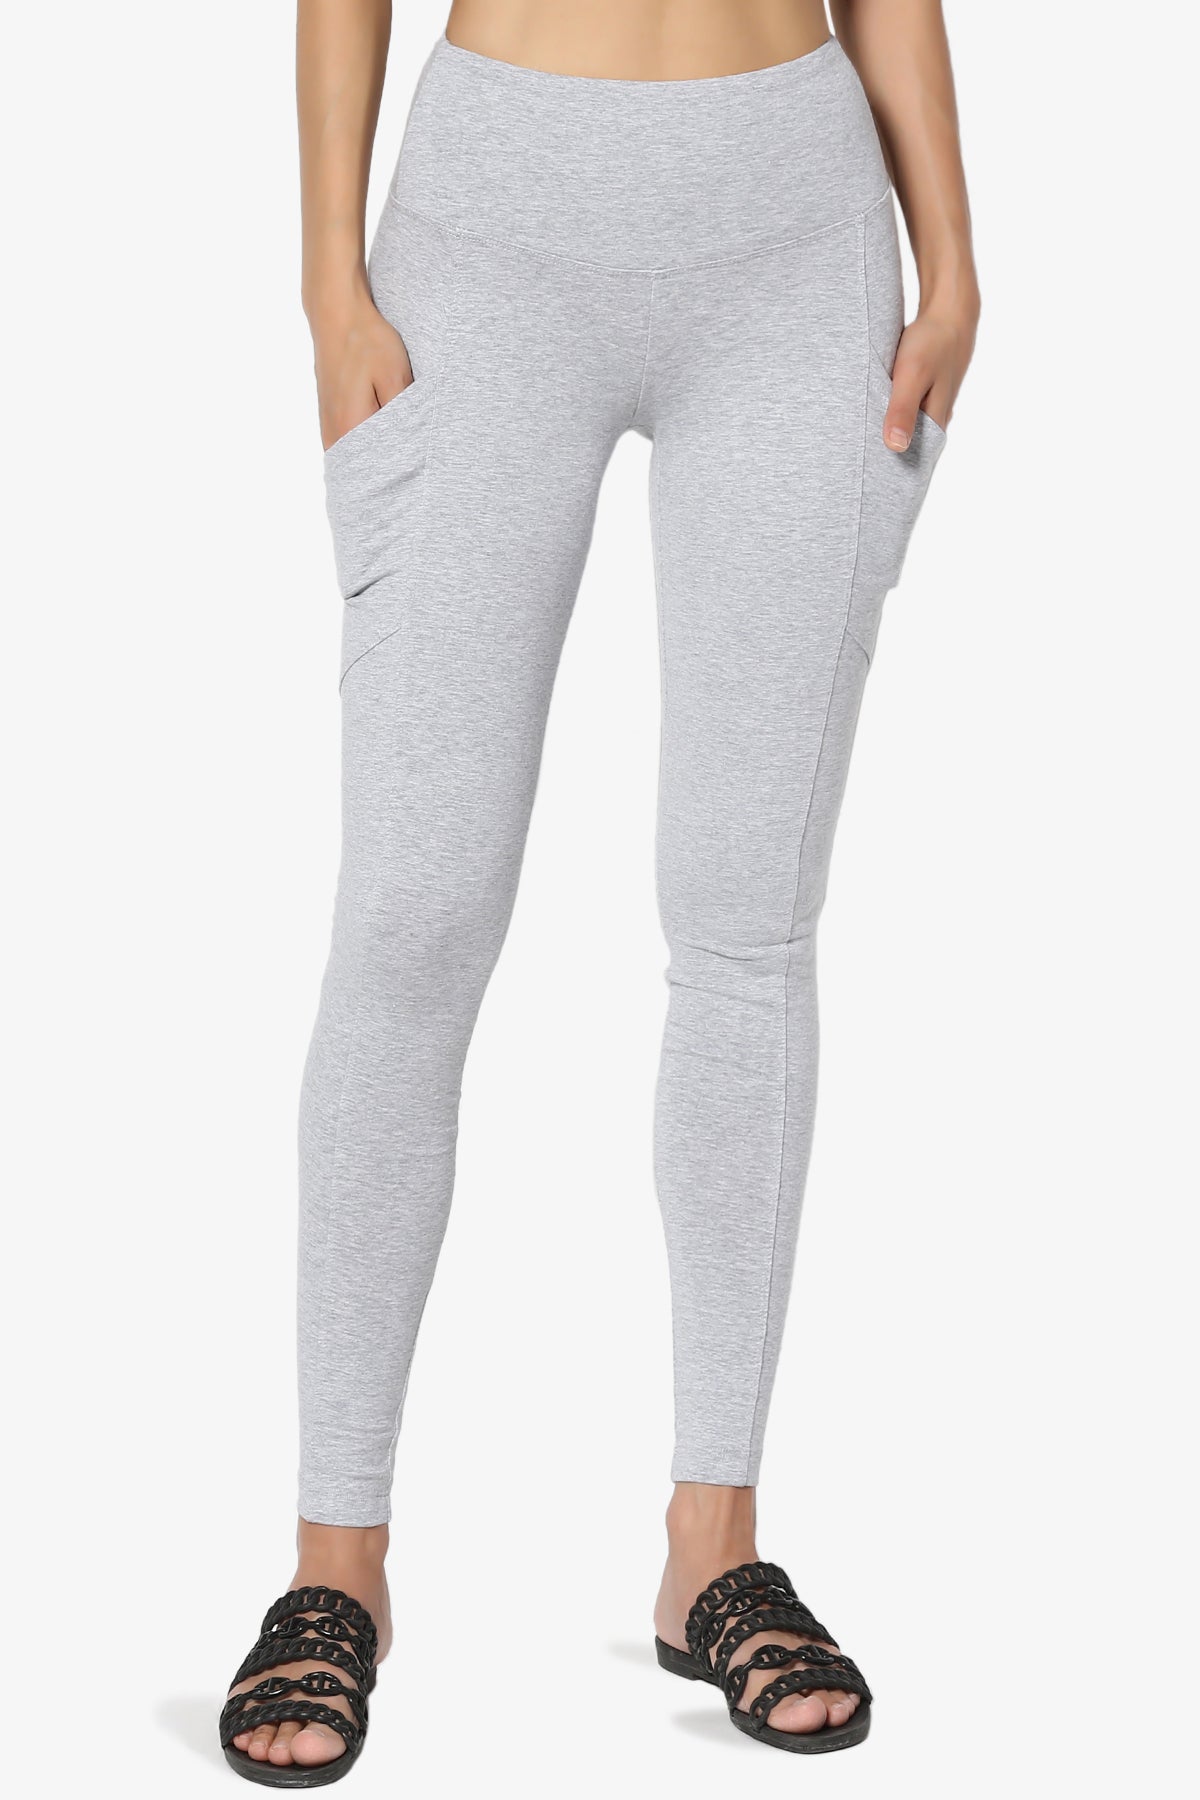 Load image into Gallery viewer, Ansley Luxe Cotton Leggings with Pockets HEATHER GREY_3
